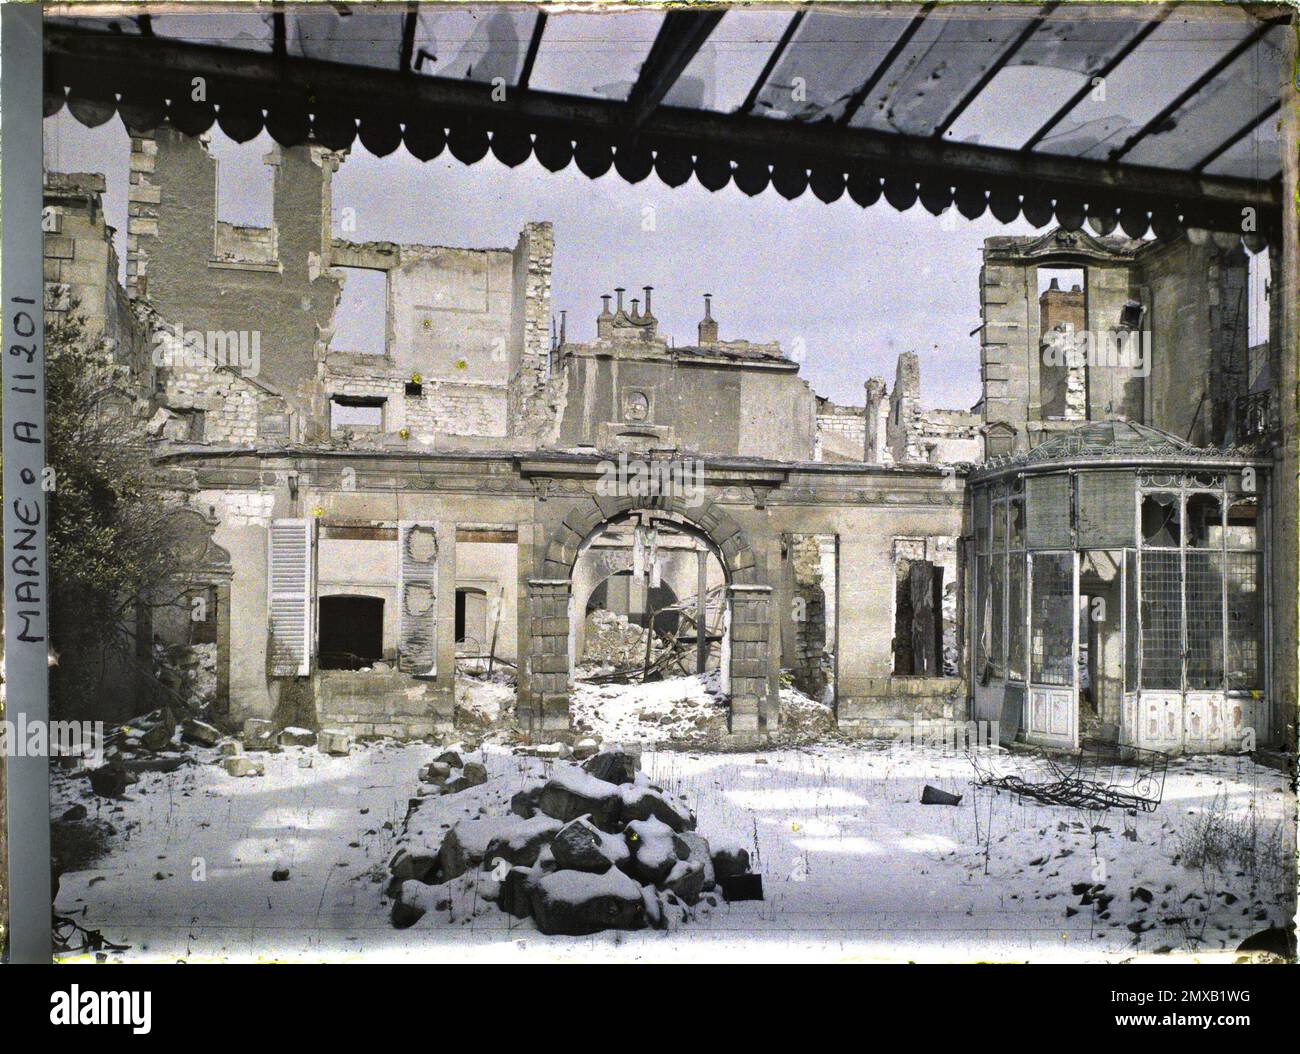 Reims, Marne, Champagne, France ruin of the Thiret de Prain hotel, rue Eugéne Desteuque , 1917 - Marne - Fernand Cuville (photographic section of the armies) Stock Photo